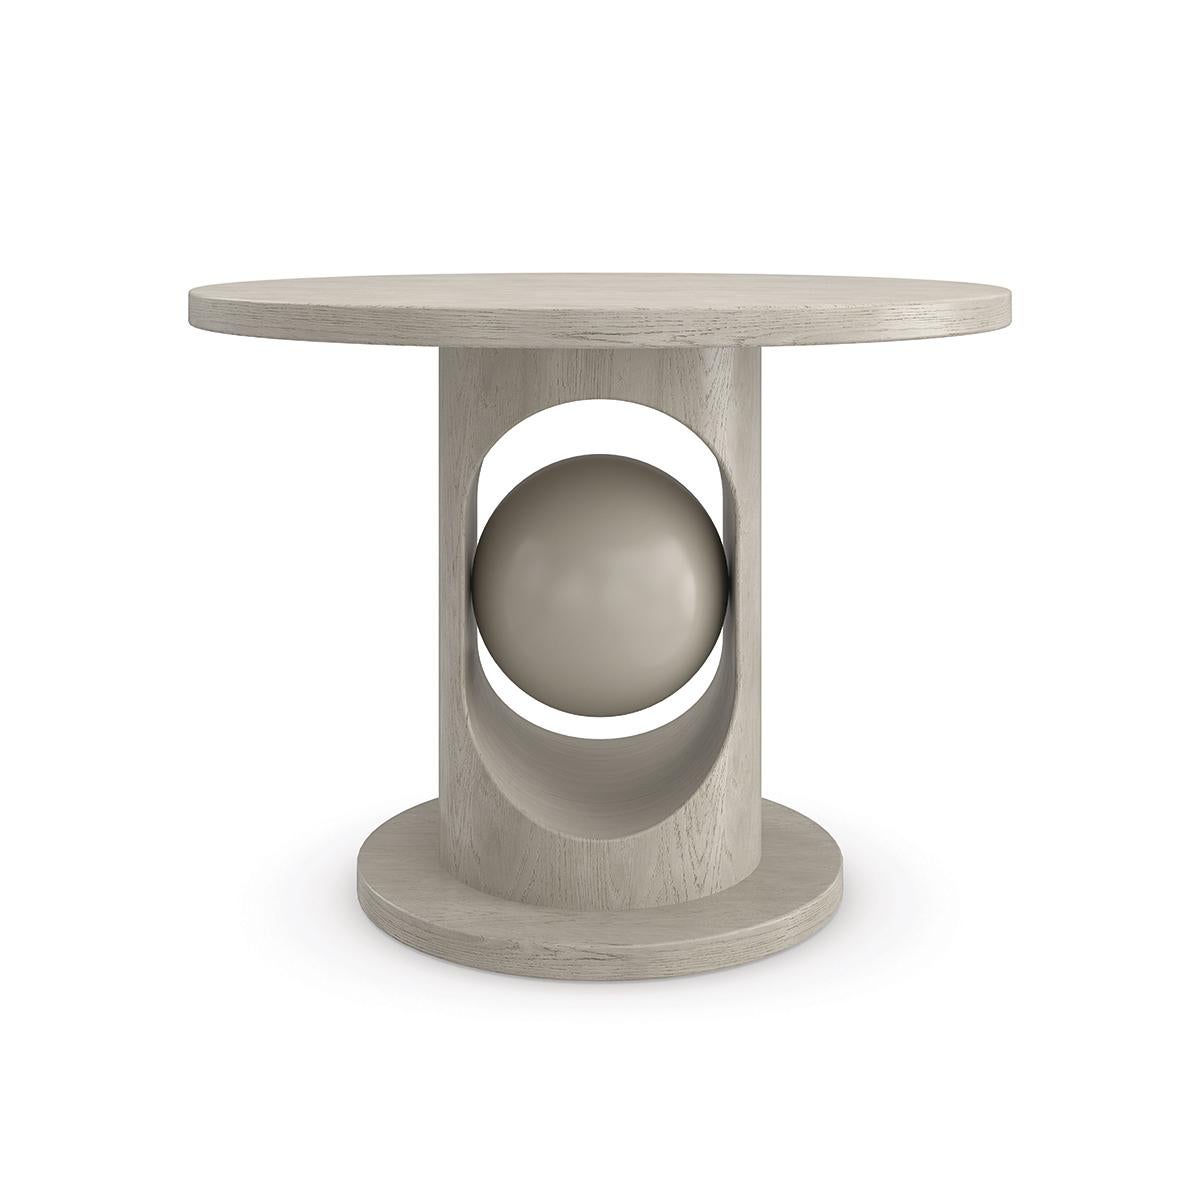 Naturally evoking a sense of balance, this eye-catching dining table features a decorative sphere suspended within its curved pedestal base. A light taupe finish highlights the organic beauty of ash and oak wood for a timeless neutral hue that